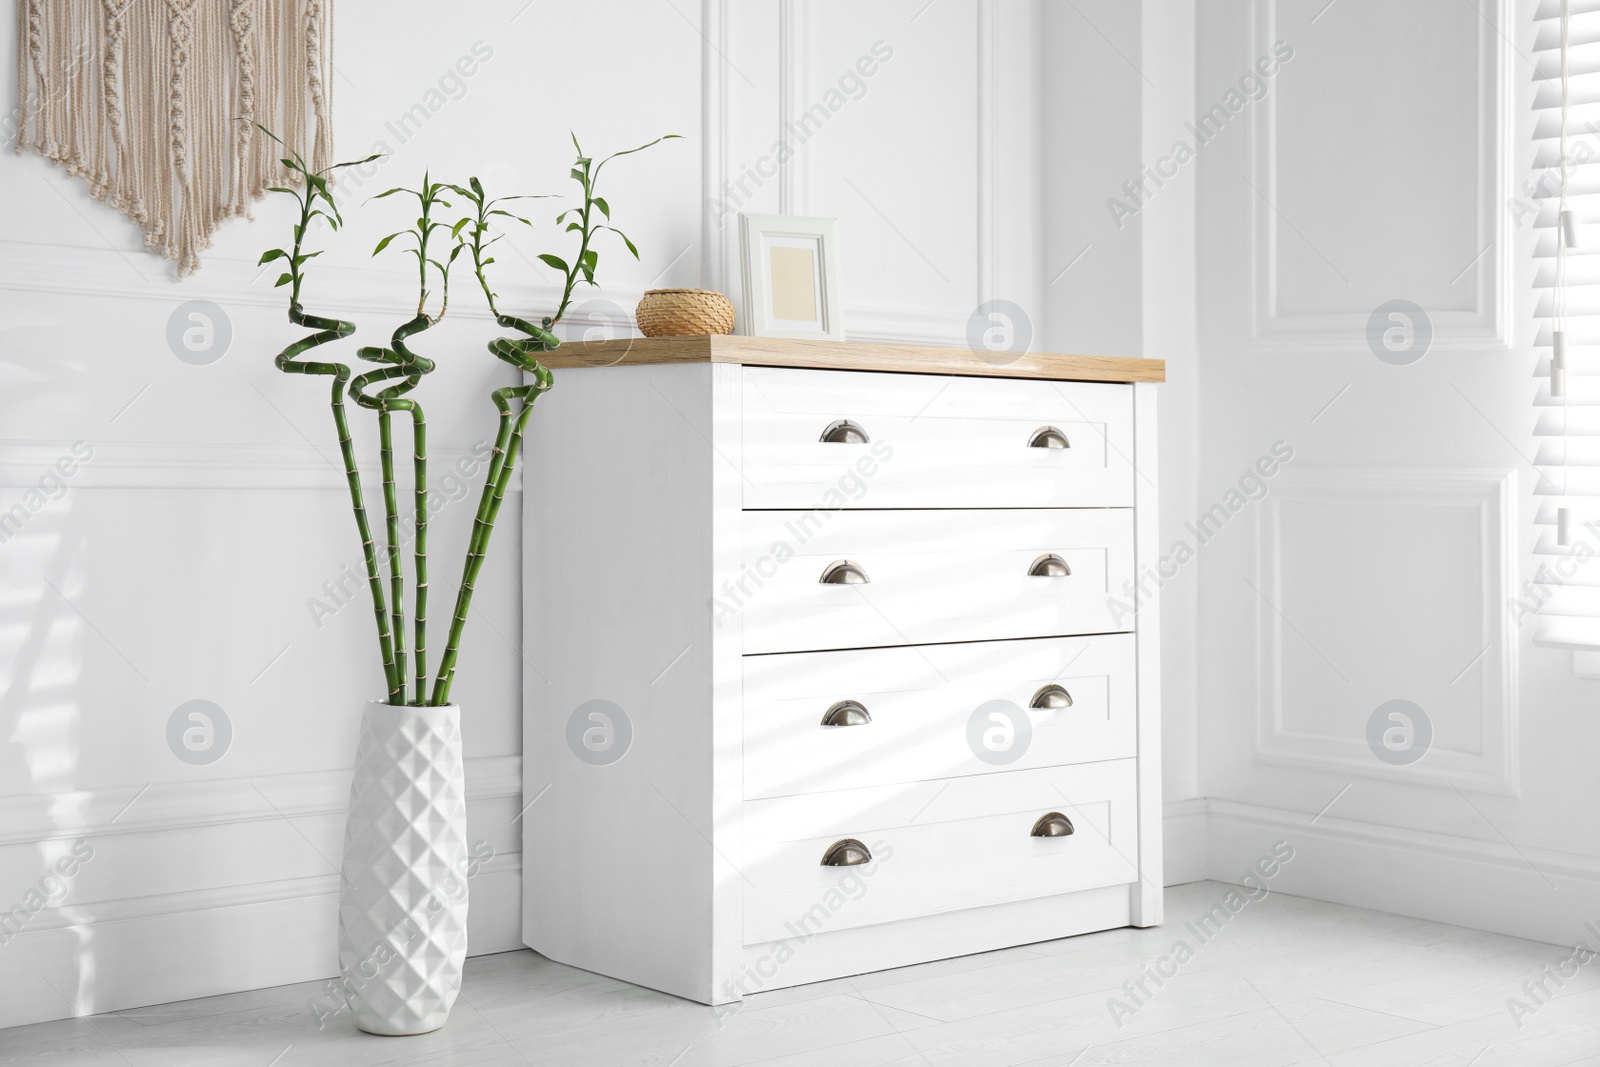 Photo of Vase with green bamboo stems near chest of drawers in room. Interior design